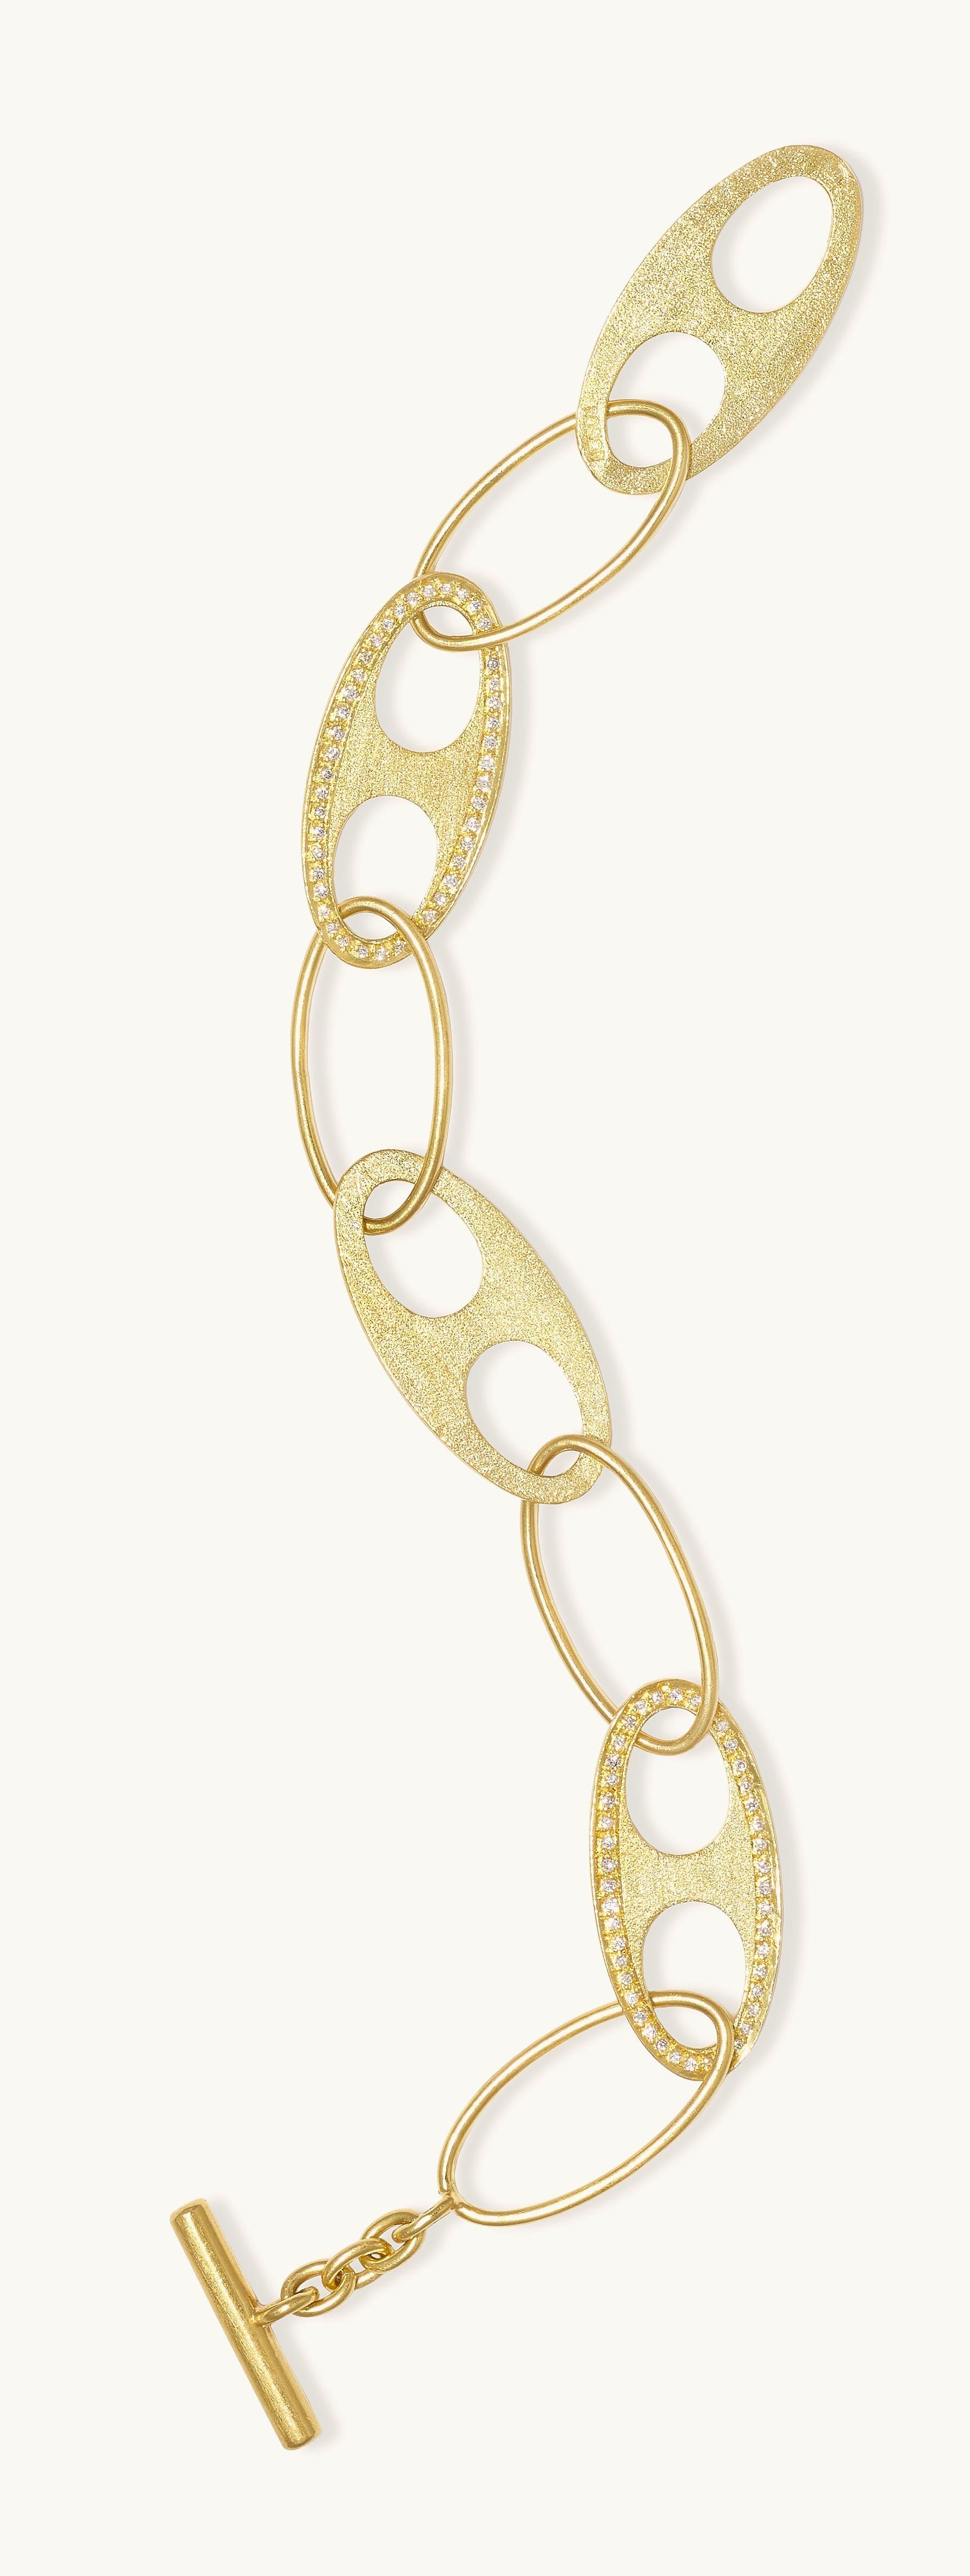 Rosior Contemporary Link Bracelet made in 19.2K yellow gold and set with 88 F color, VVS clarity Diamonds with 0,40 ct.
Unique piece accompanied with its own certificate of authenticity.
Stamped by the portuguese assay office as 19,2k gold.
Stamped